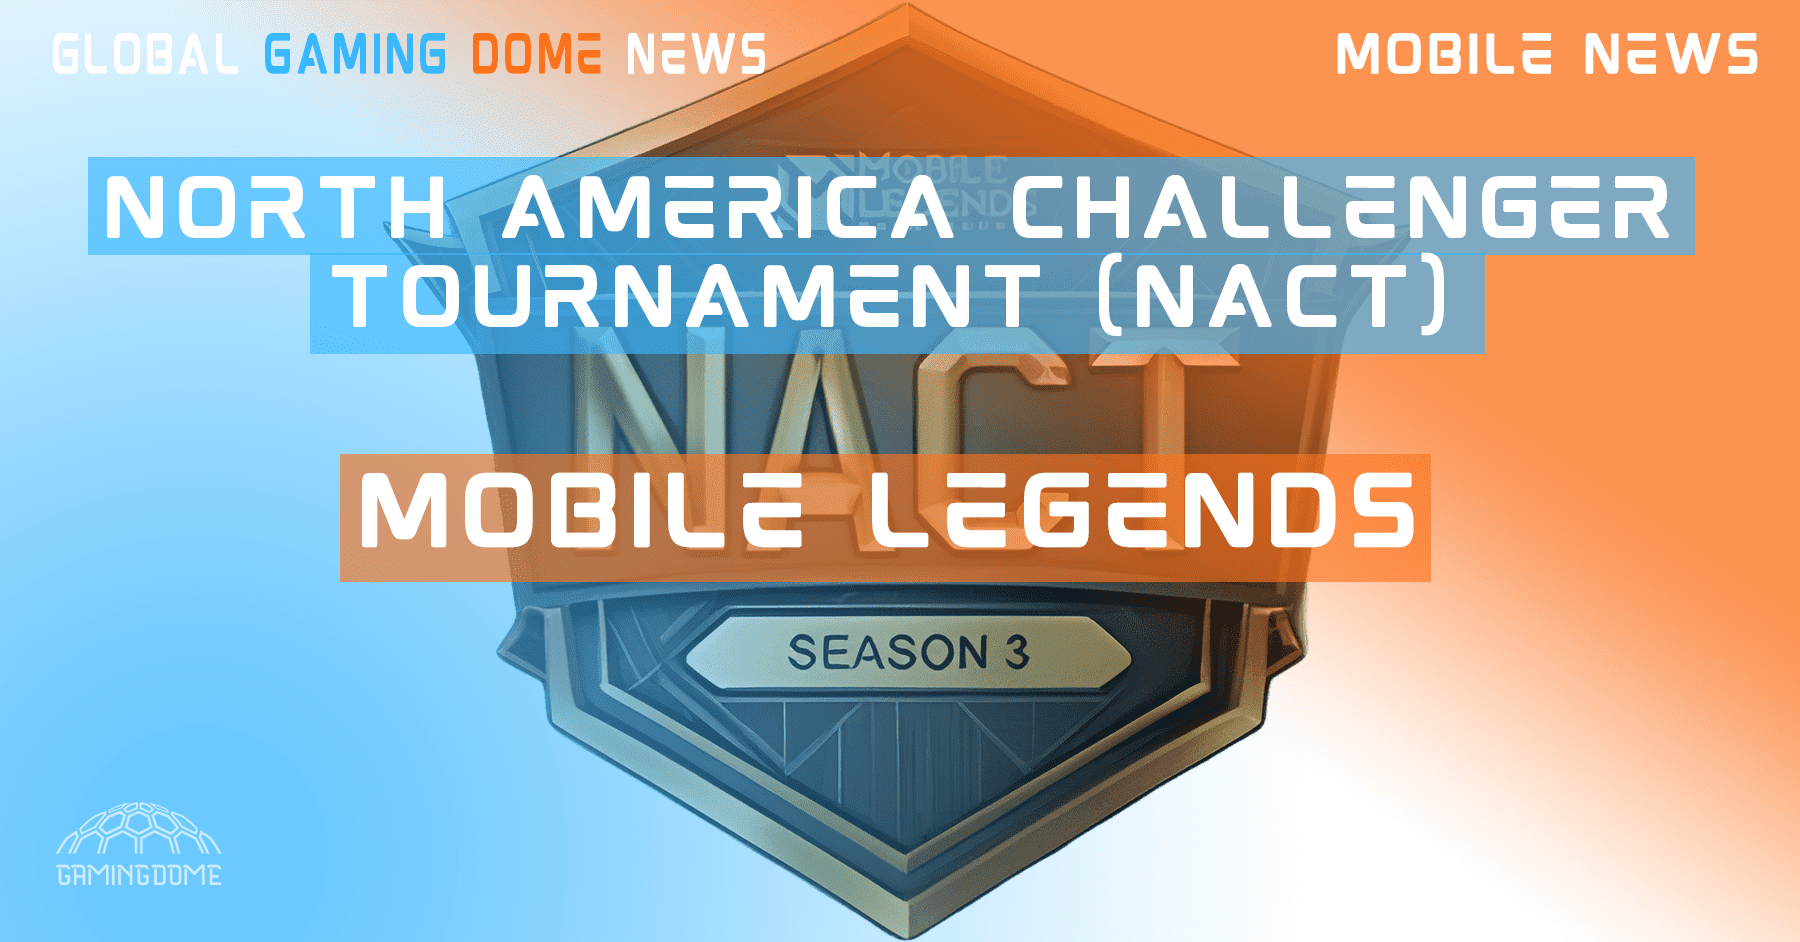 MOBILE LEGENDS NORTH AMERICA CHALLENGER TOURNAMENT (NACT)